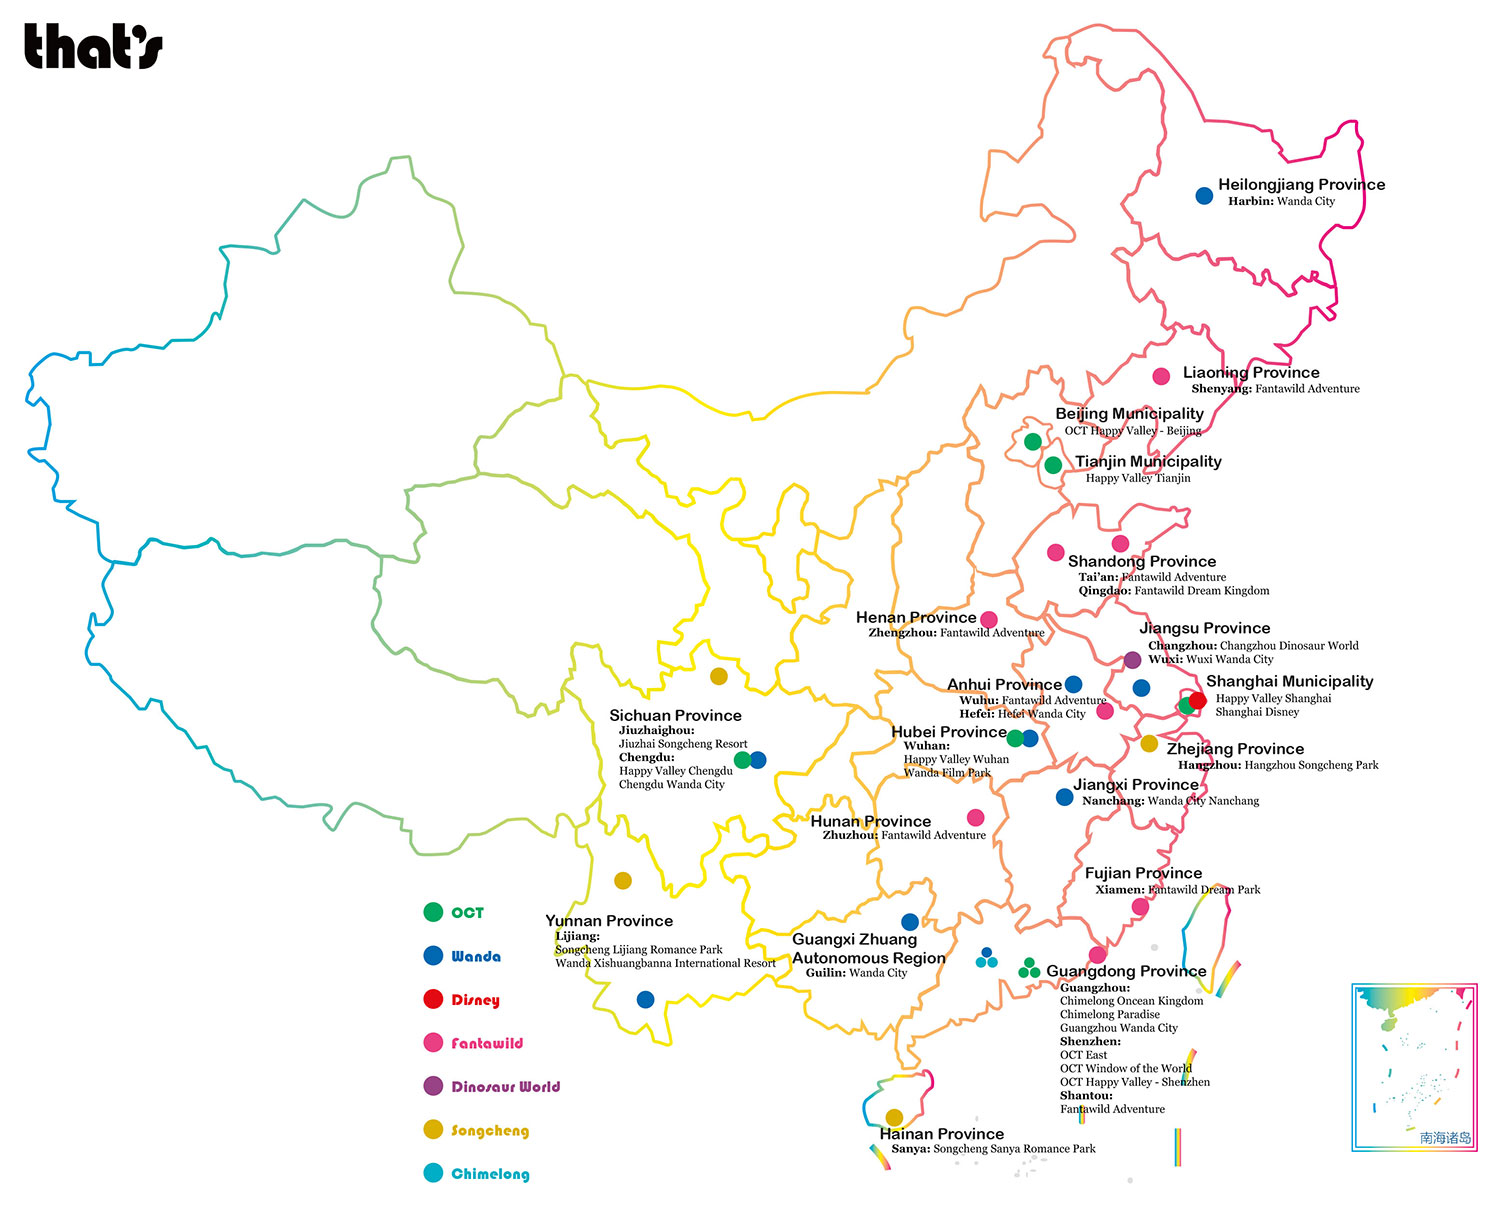 INFOGRAPHIC: China's Battle for Theme Park Supremacy